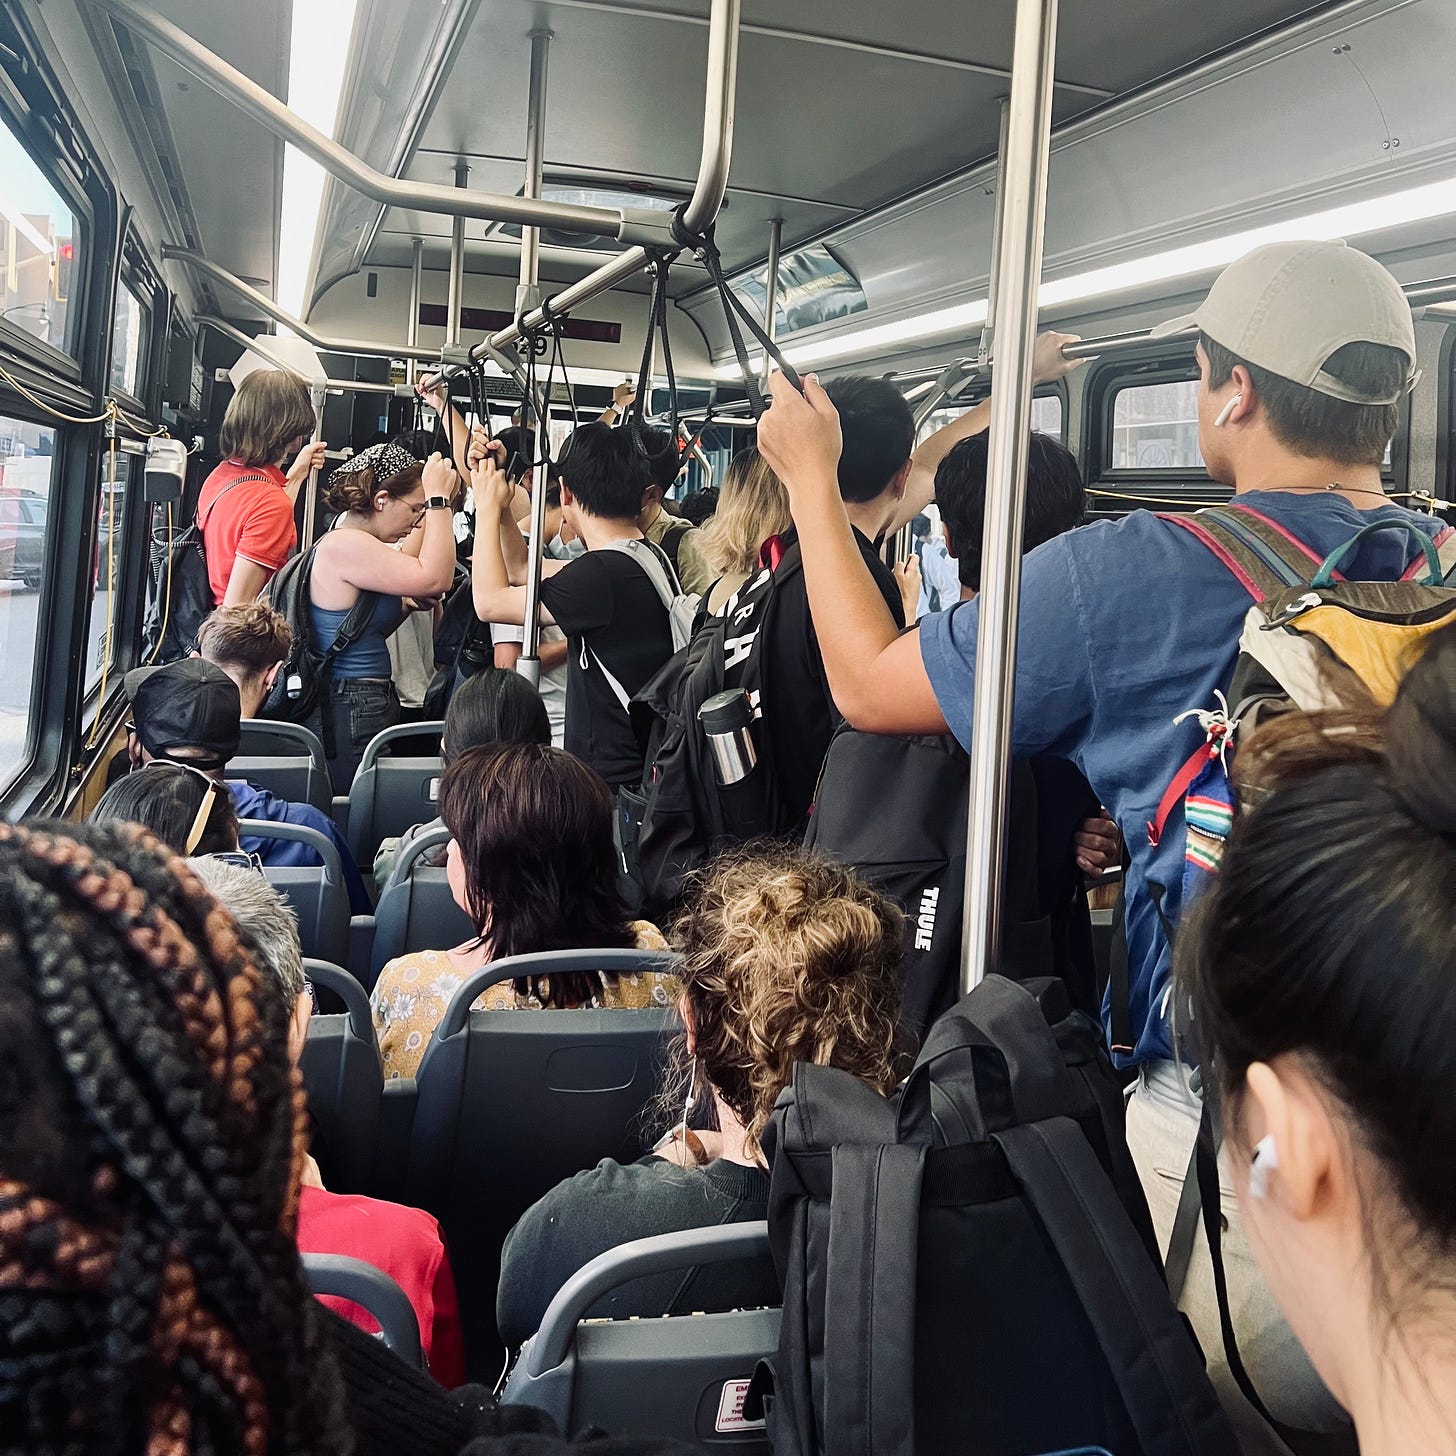 A crowded bus, people are standing up and there is no room to sit.